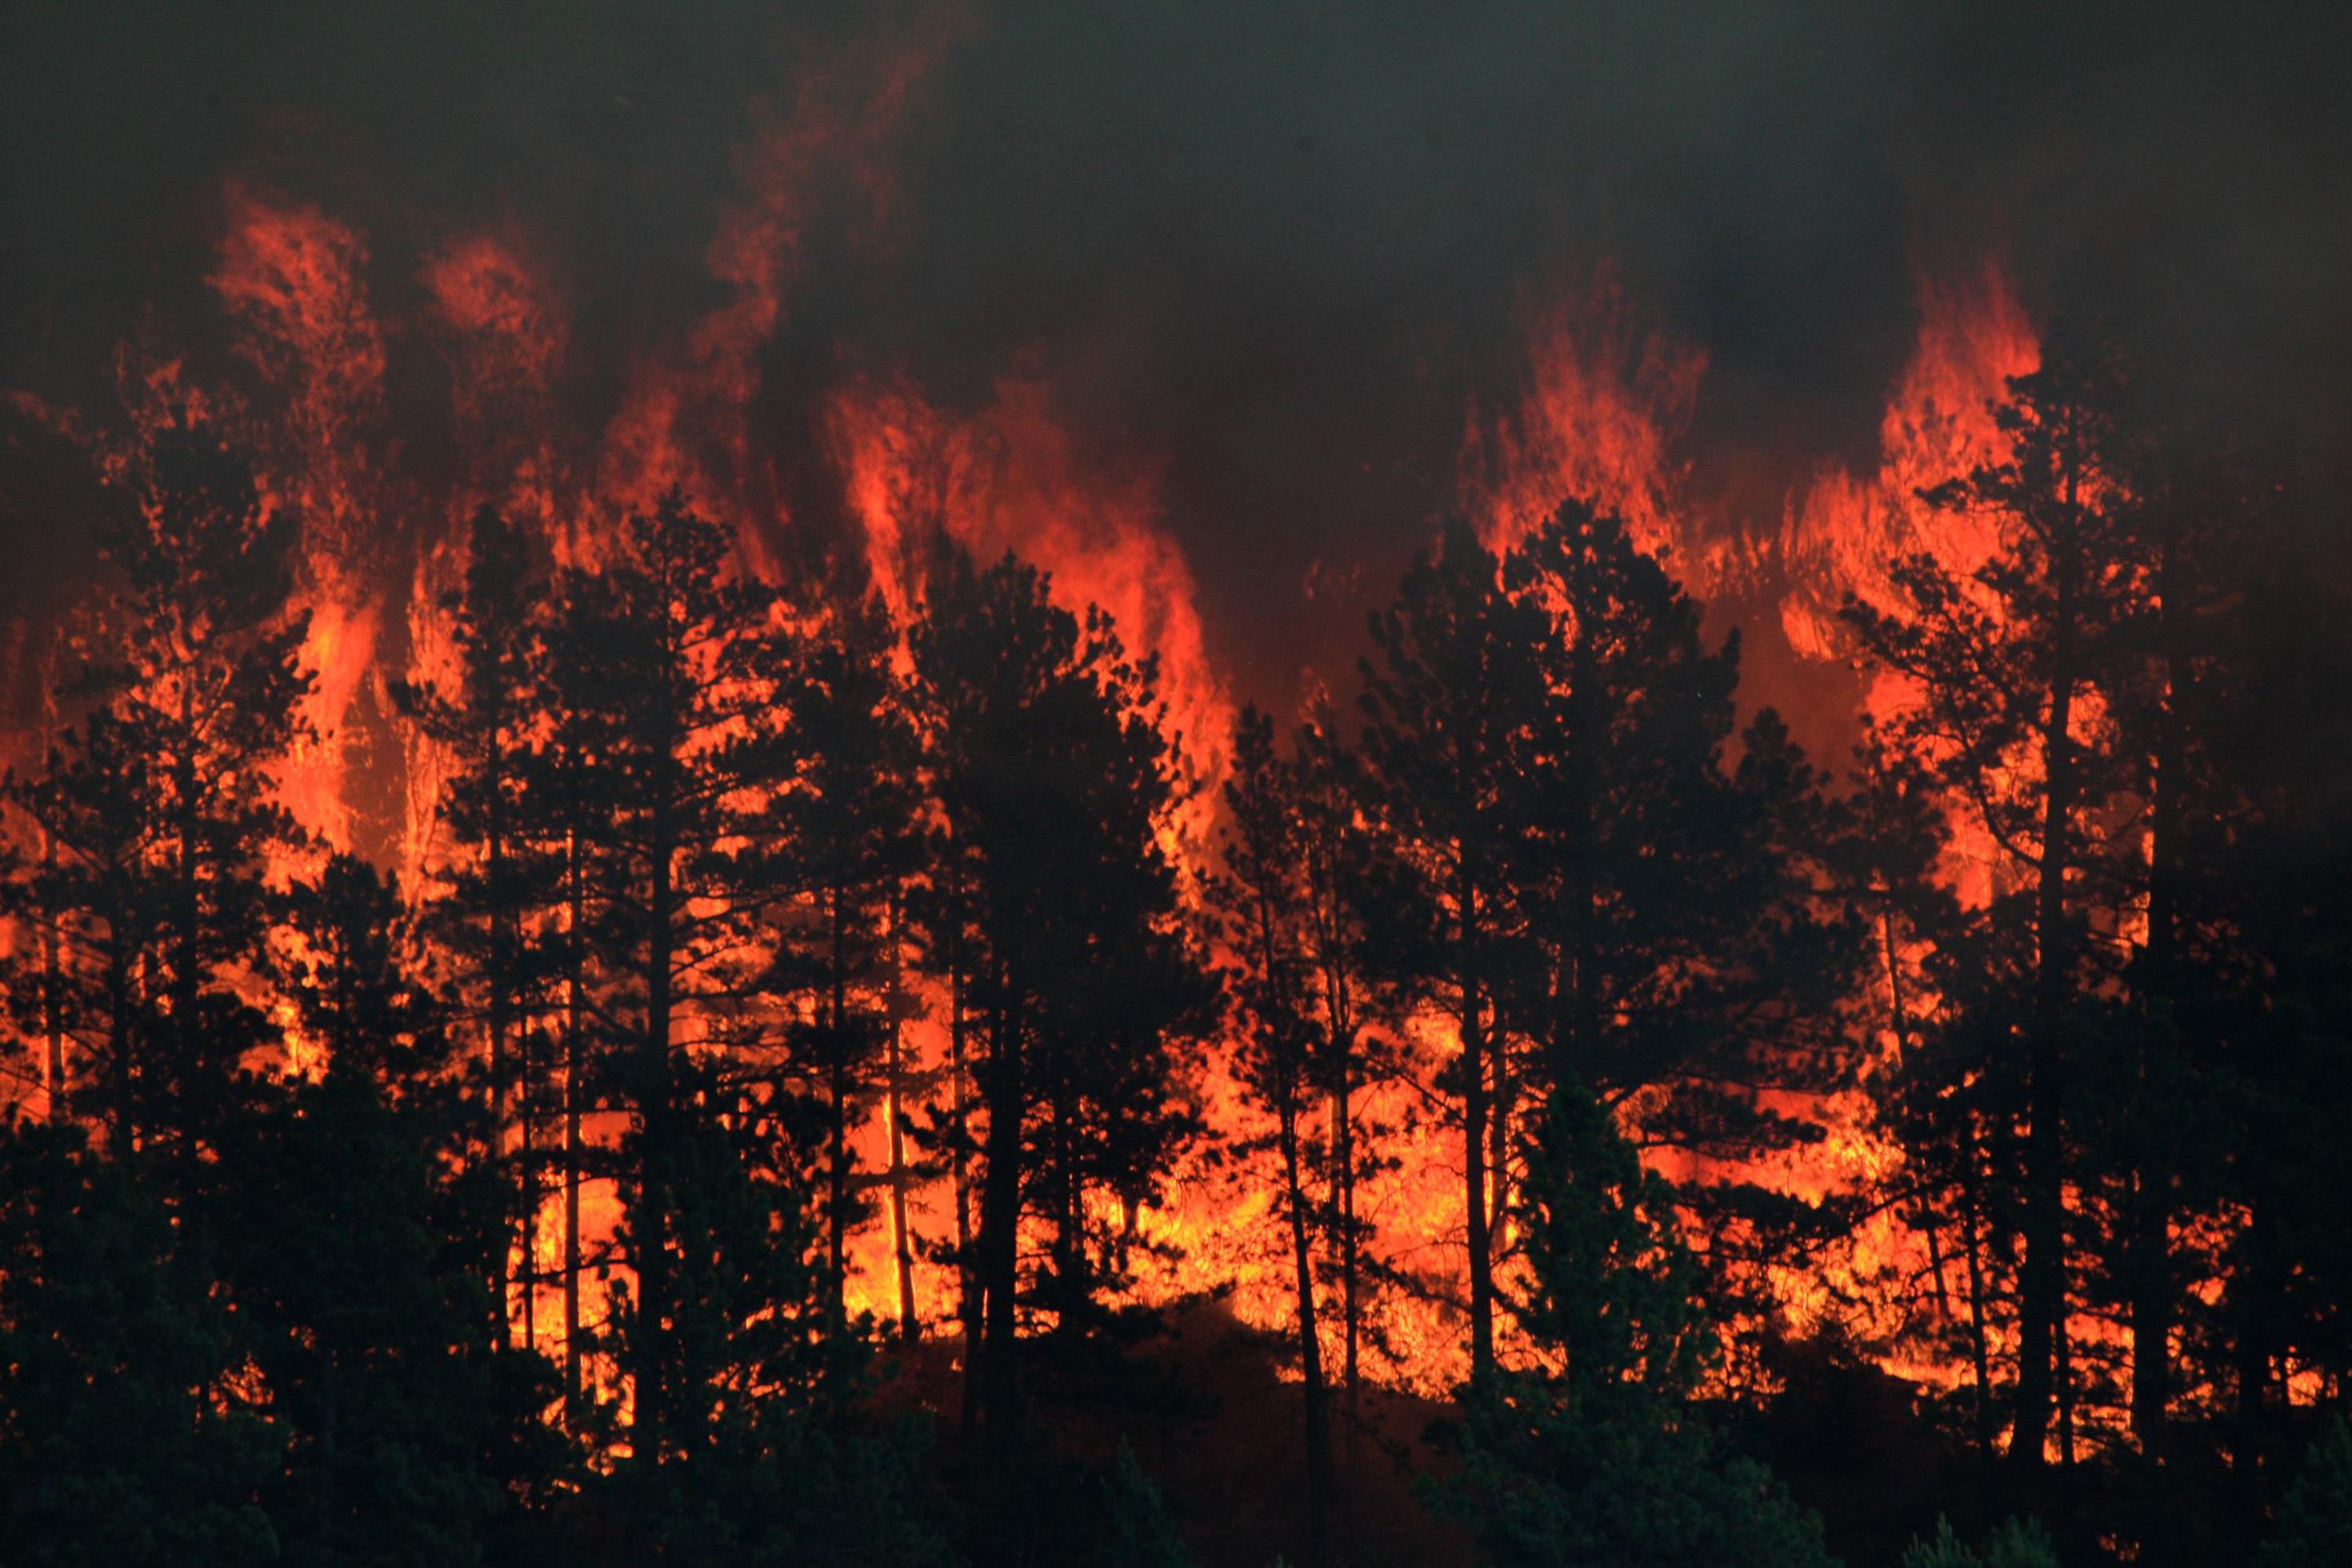 North-central Montana wildfire grows to 13 square miles | The ...